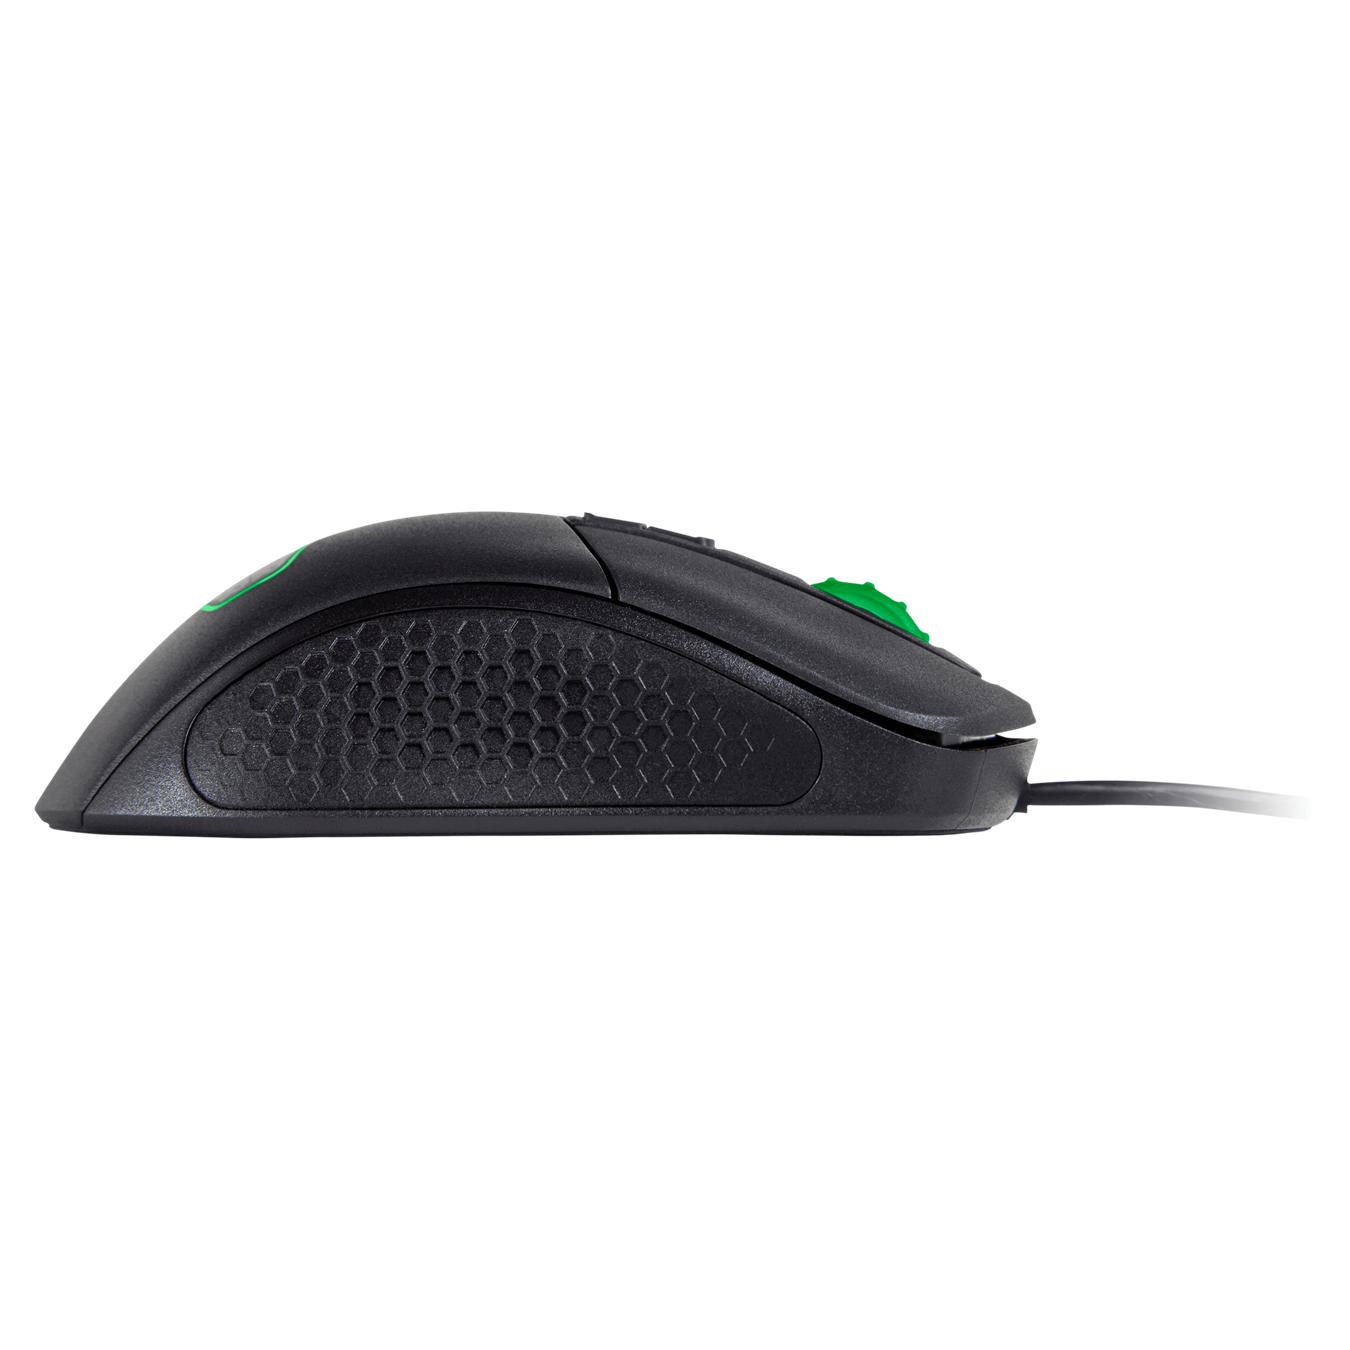 MasterMouse MM530 Gaming Mouse - Reinforced Rubber Pads on both sides to ensure better grip and quick swipe controls